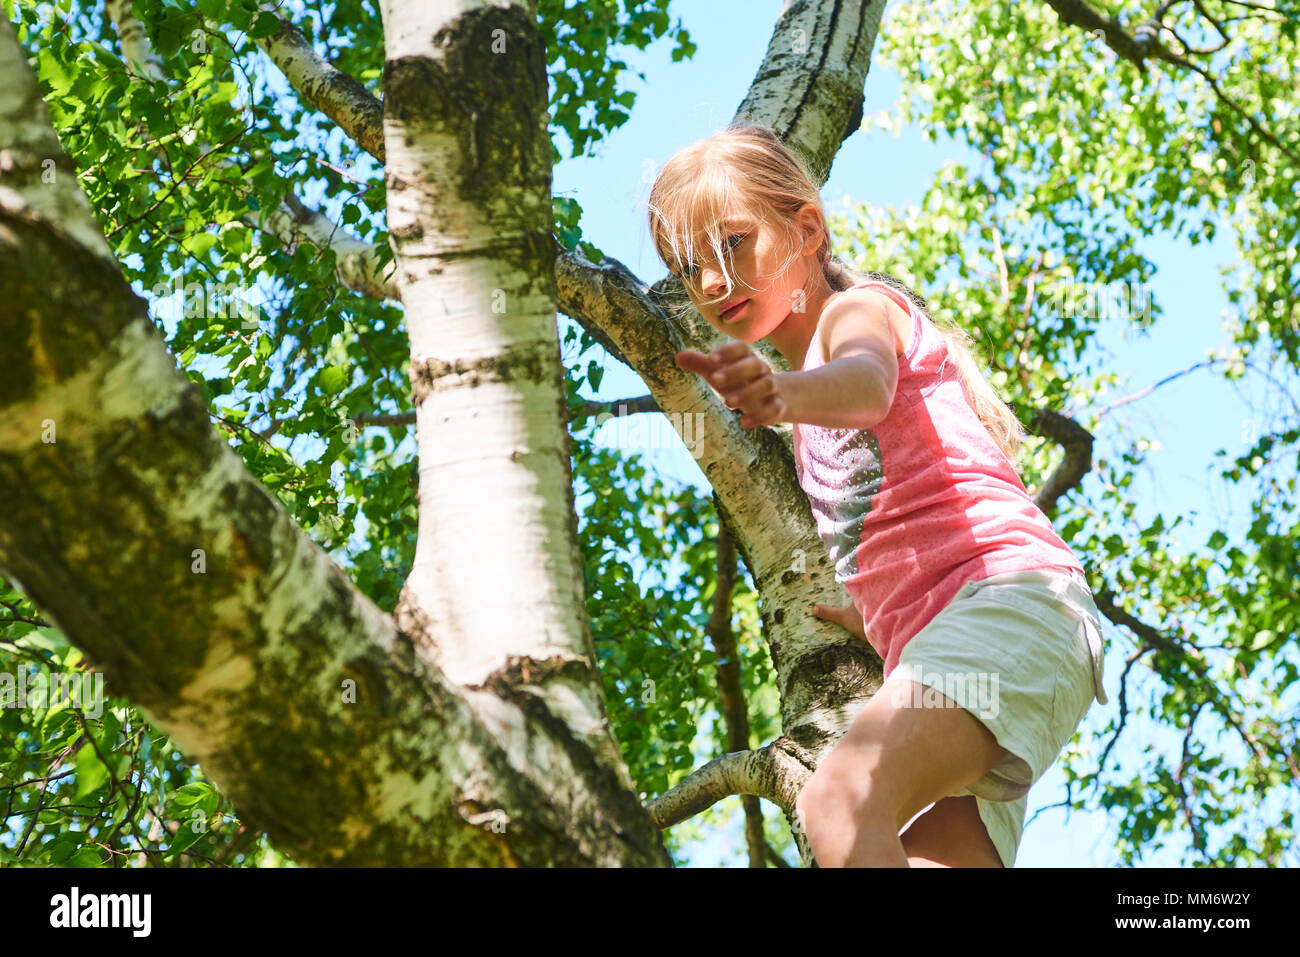 Child girl playing climbing on a tree in a summer park outdoor. Concept of healthy play and development of the child in nature Stock Photo